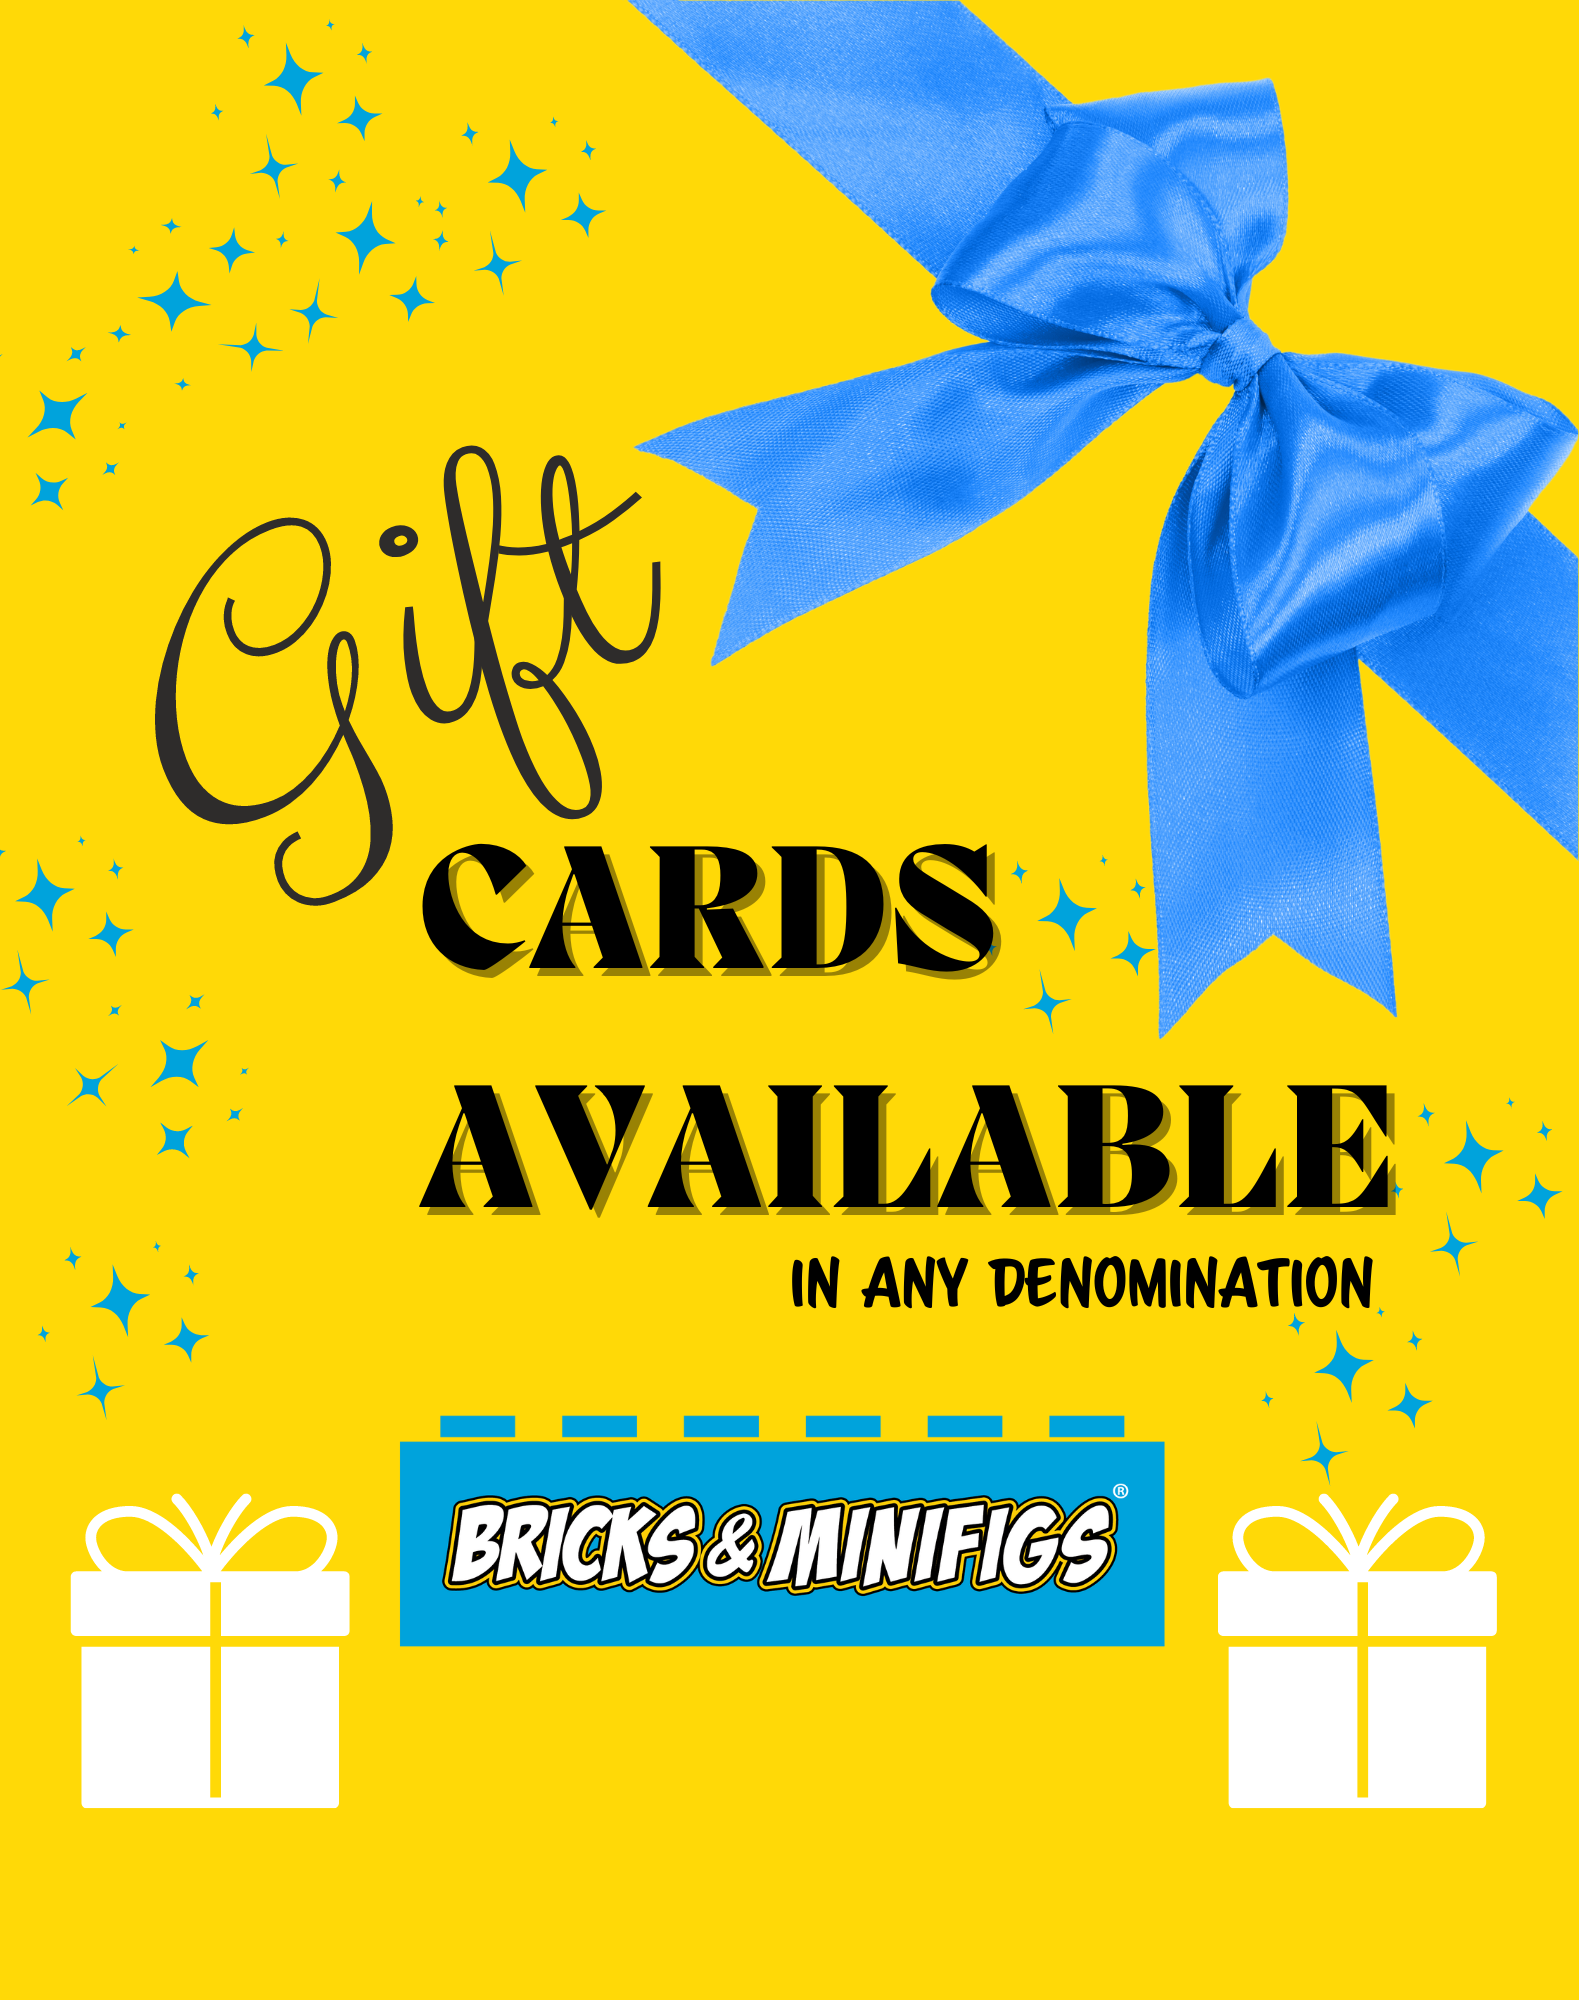 Image promoting gift cards